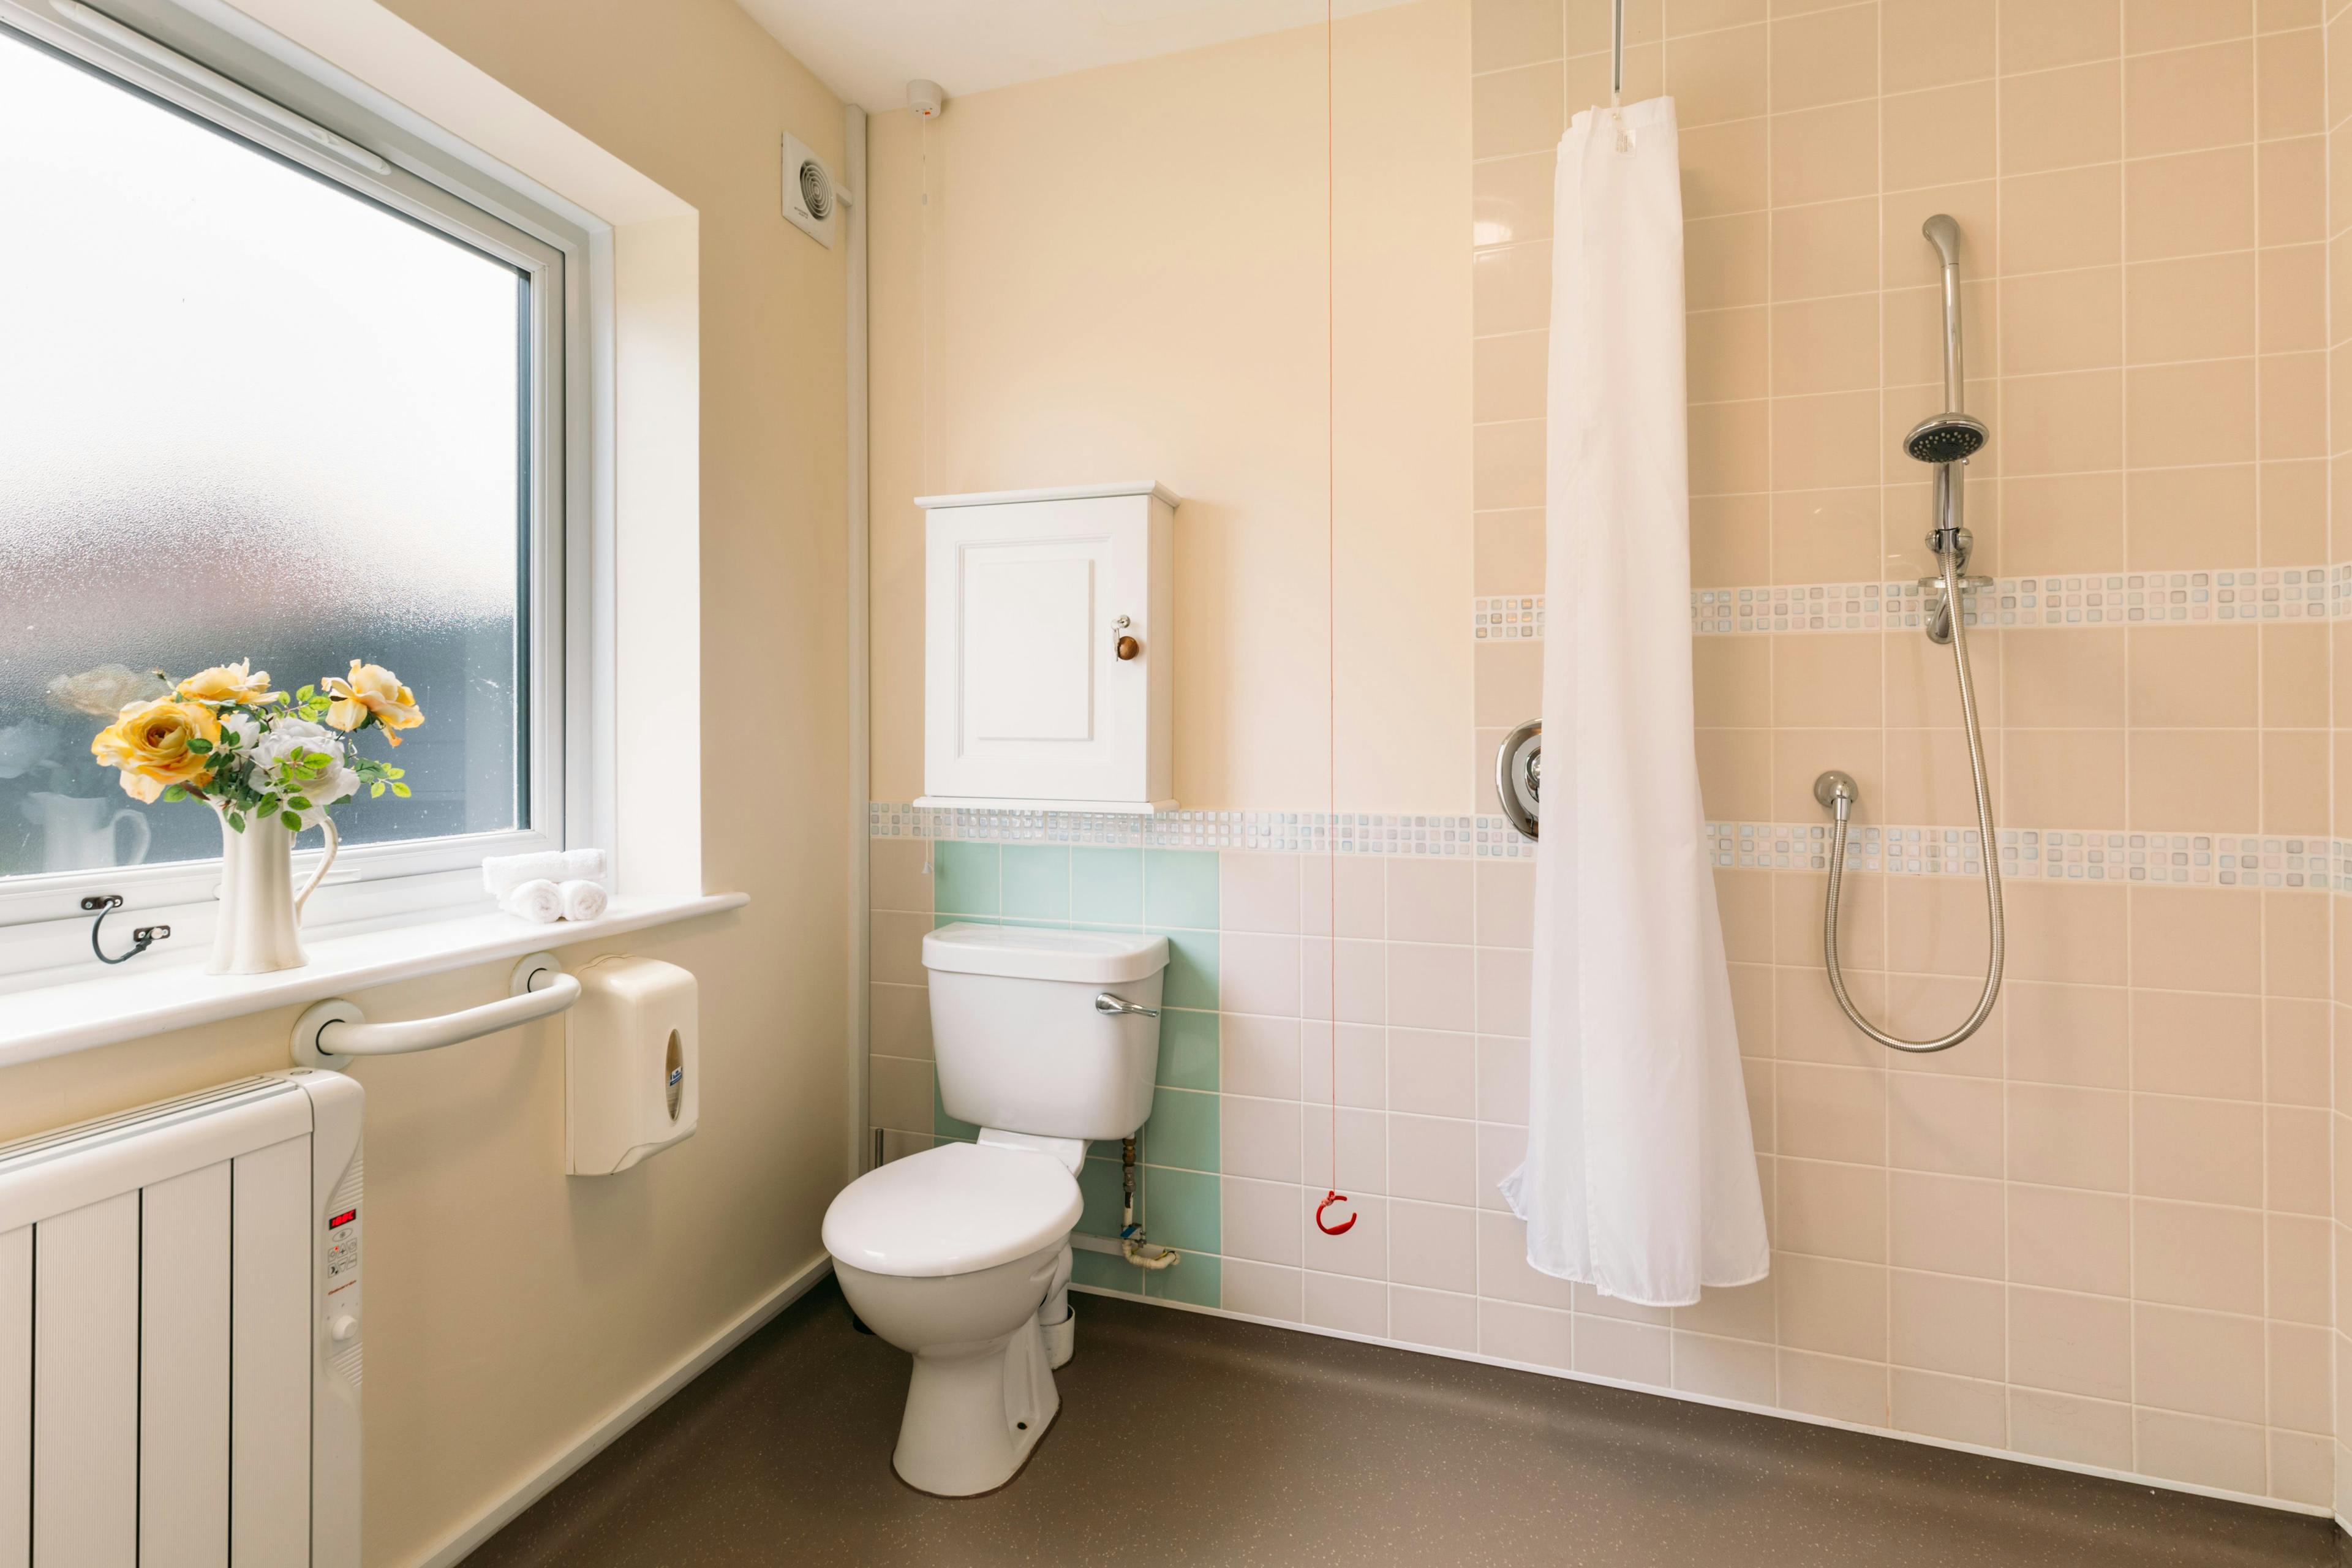 Bathroom in Orchard House Care Home in Newport, Isle of Wight